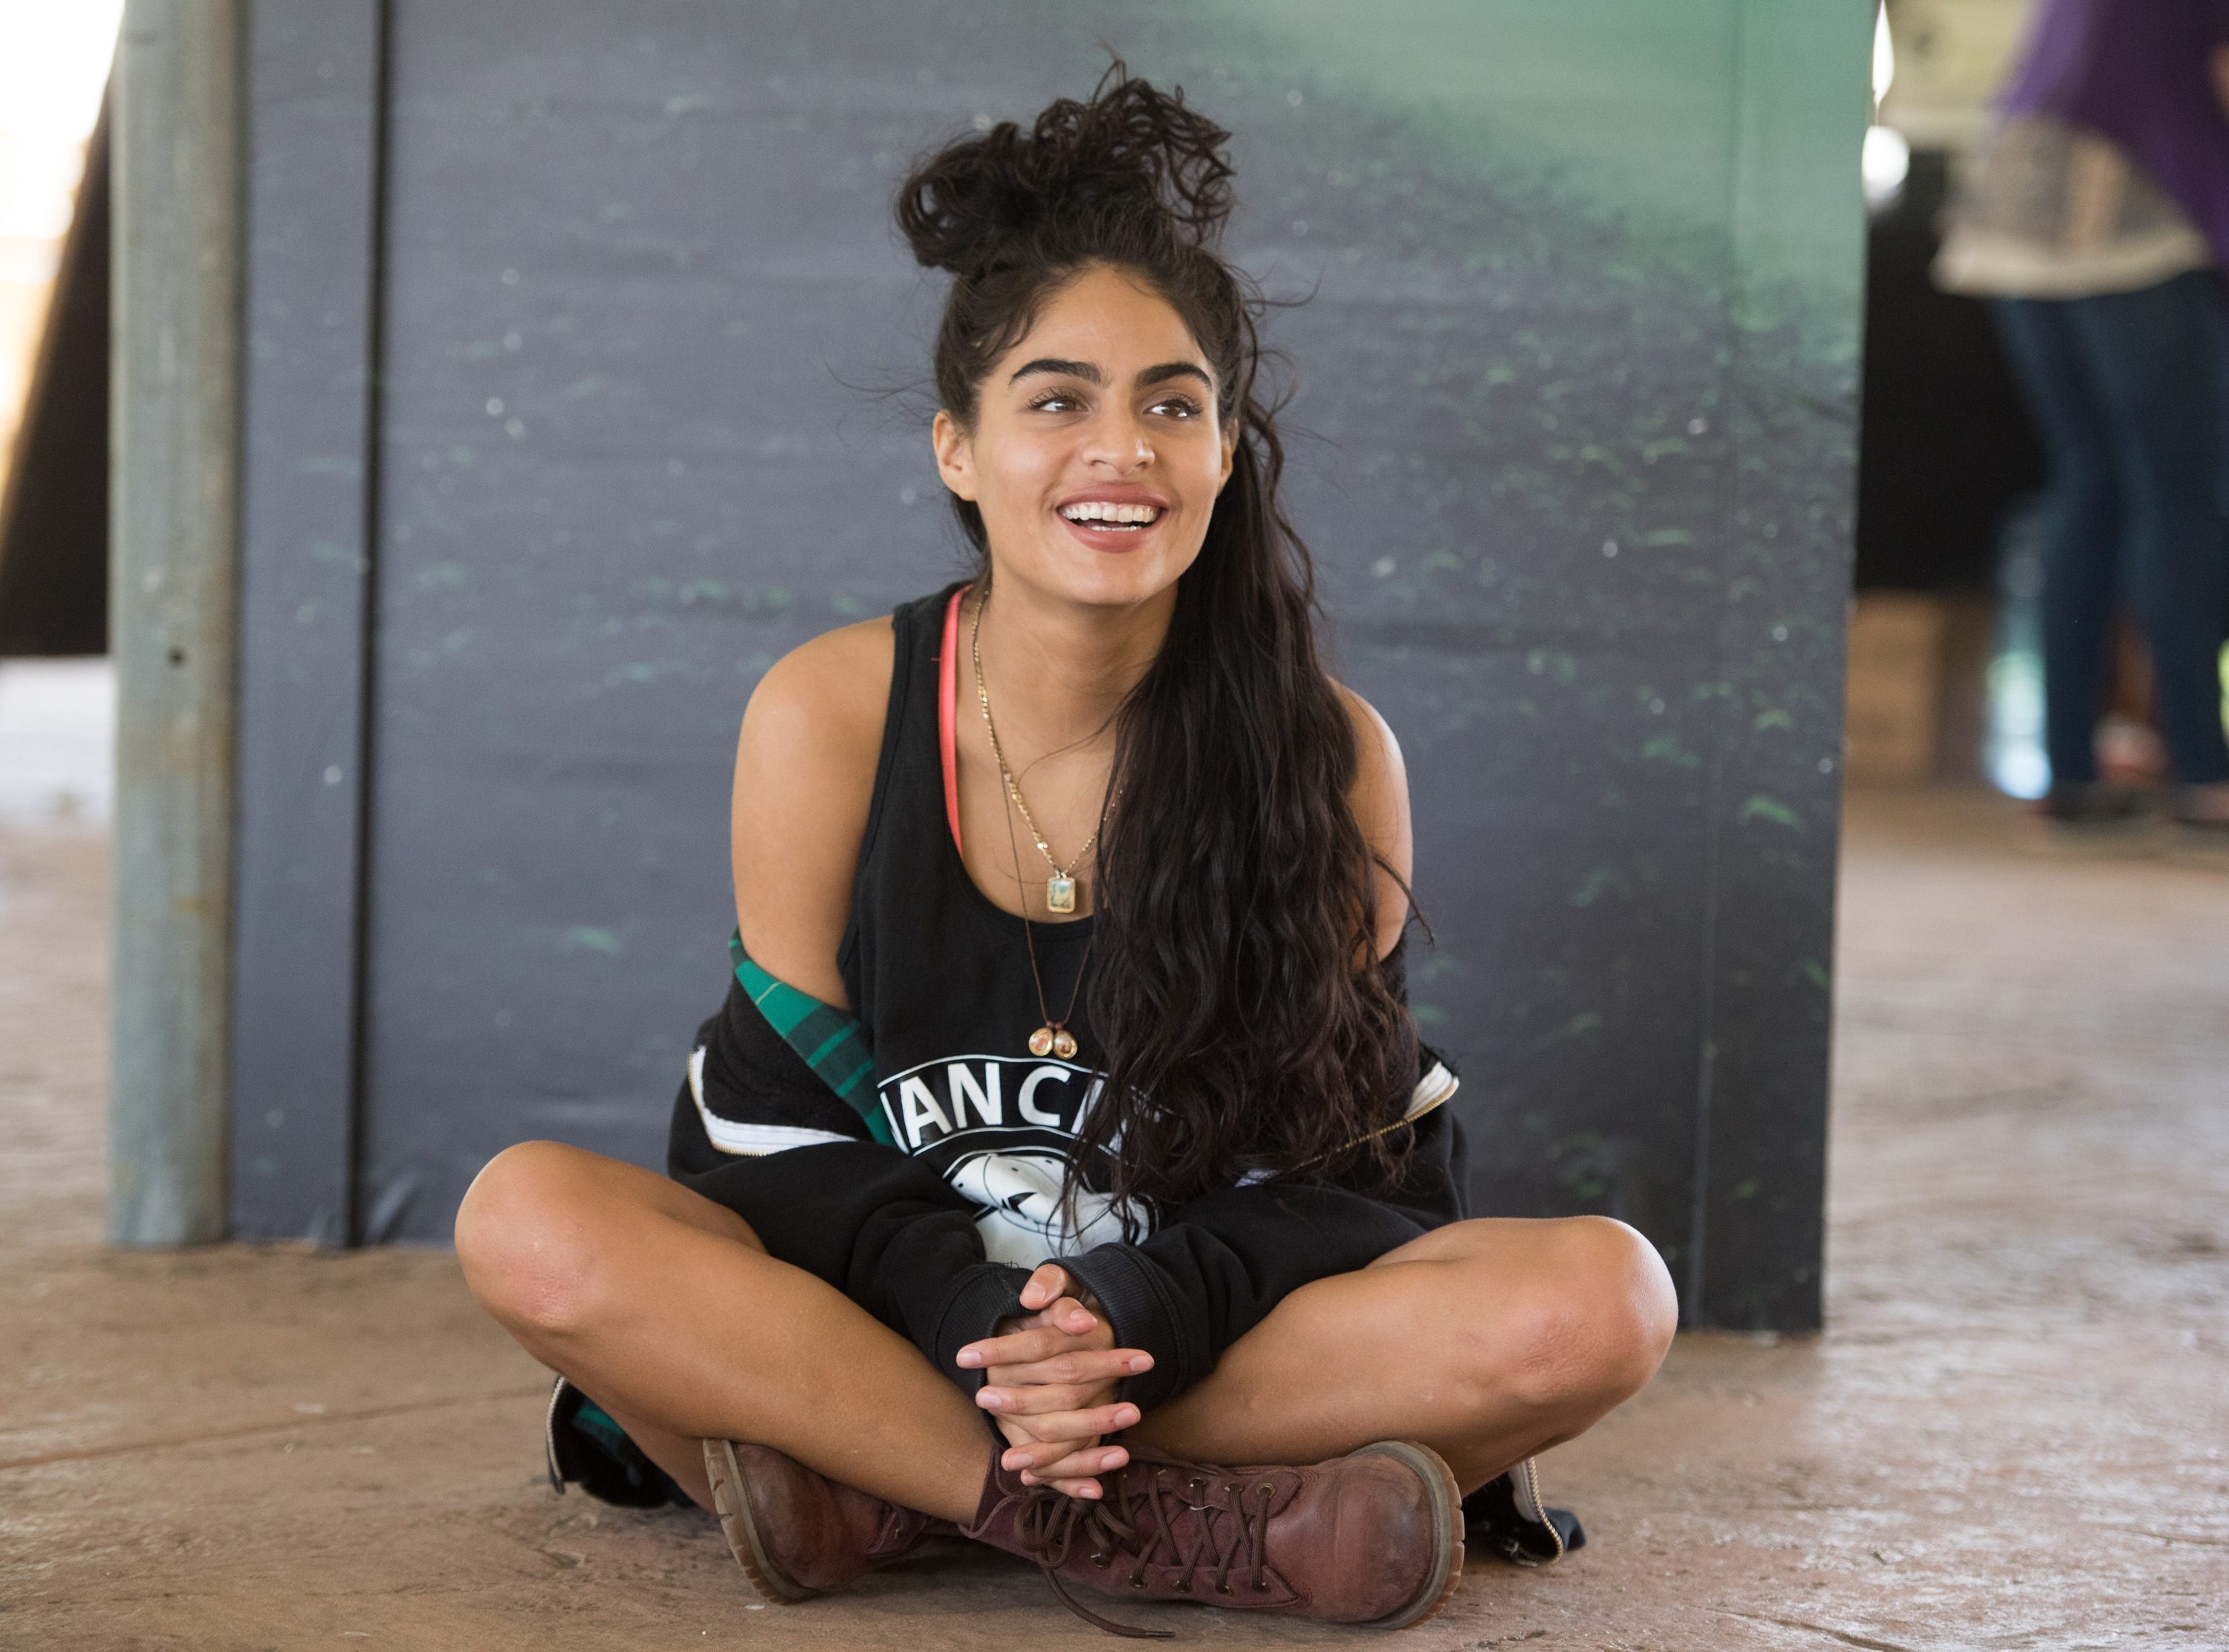 Jessie Reyez Accuses "Drunk in Love" Producer Detail of Sexual Misconduct, Says He Inspired "Gatekeeper"